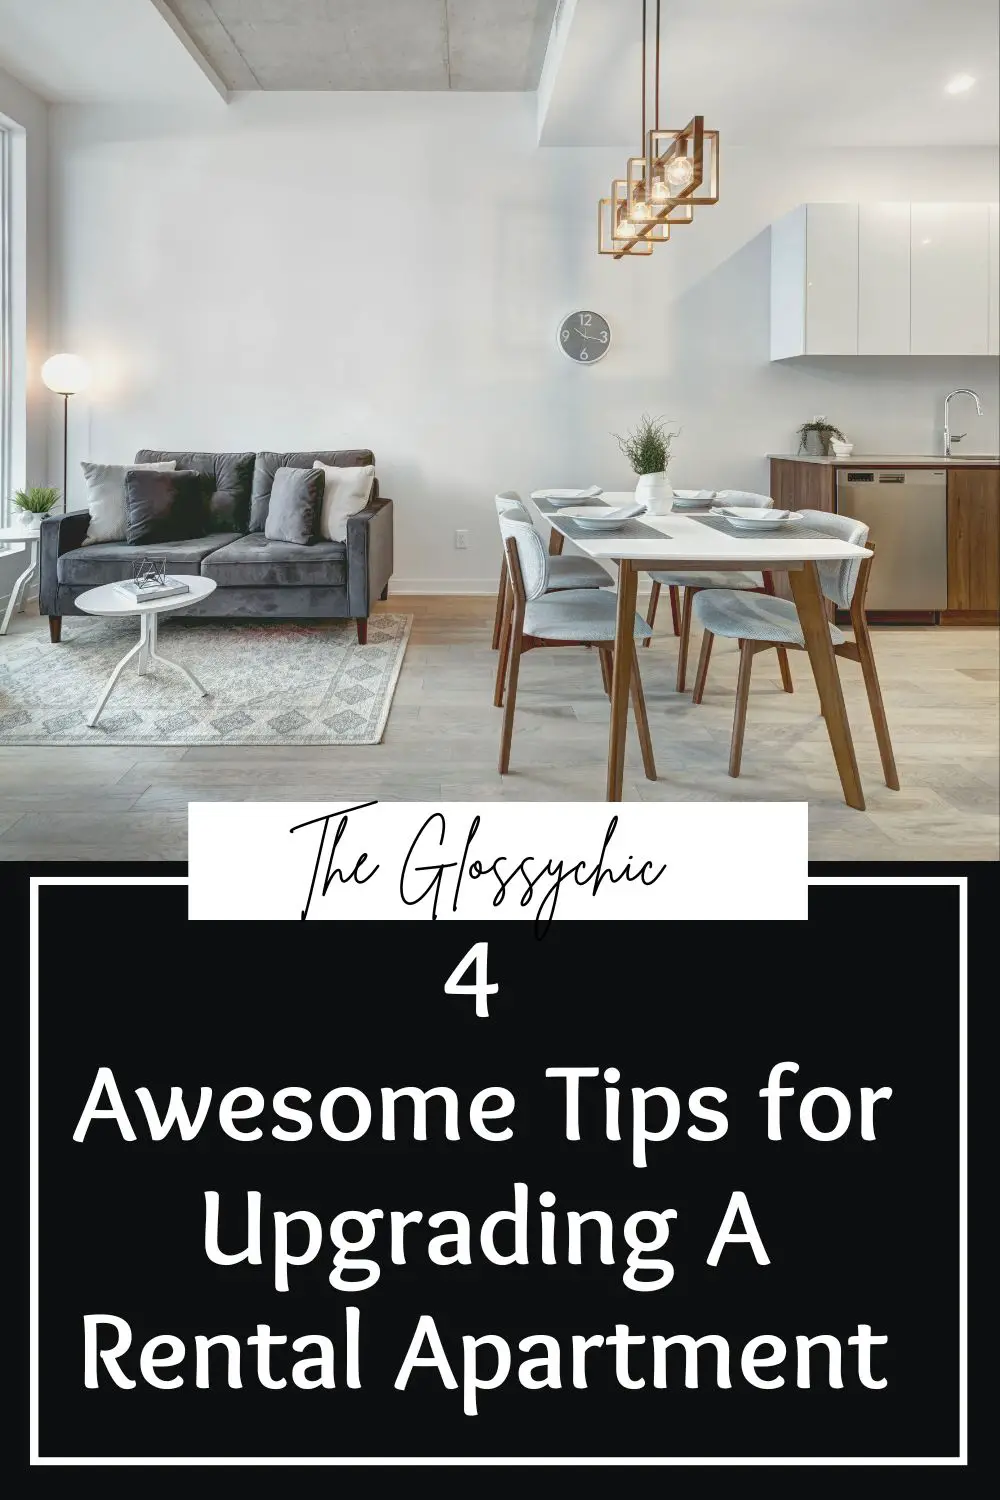 4 Awesome Tips for Upgrading A Rental Apartment